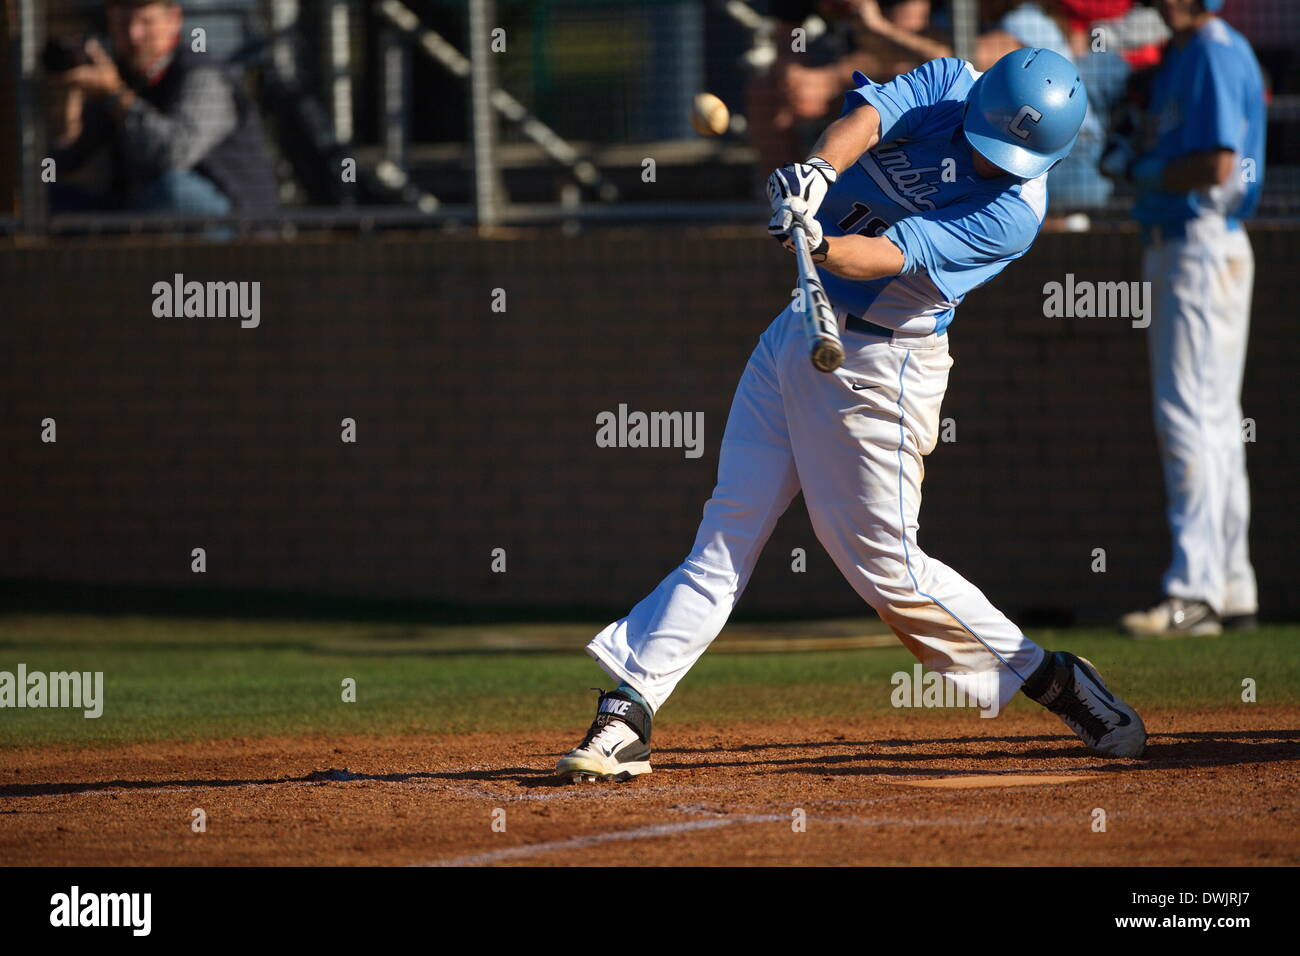 Kennesaw, Georgia, USA.  March 8, 2014 -- David Vandercook (18) swings at a pitch during Saturday's doubleheader between Columbia University and Kennesaw State University.  The teams split the doubleheader.  Columbia one the first game 9-3.  KSU won the night cap 15-1. Credit:  Wayne Hughes | Alamy Live News Stock Photo